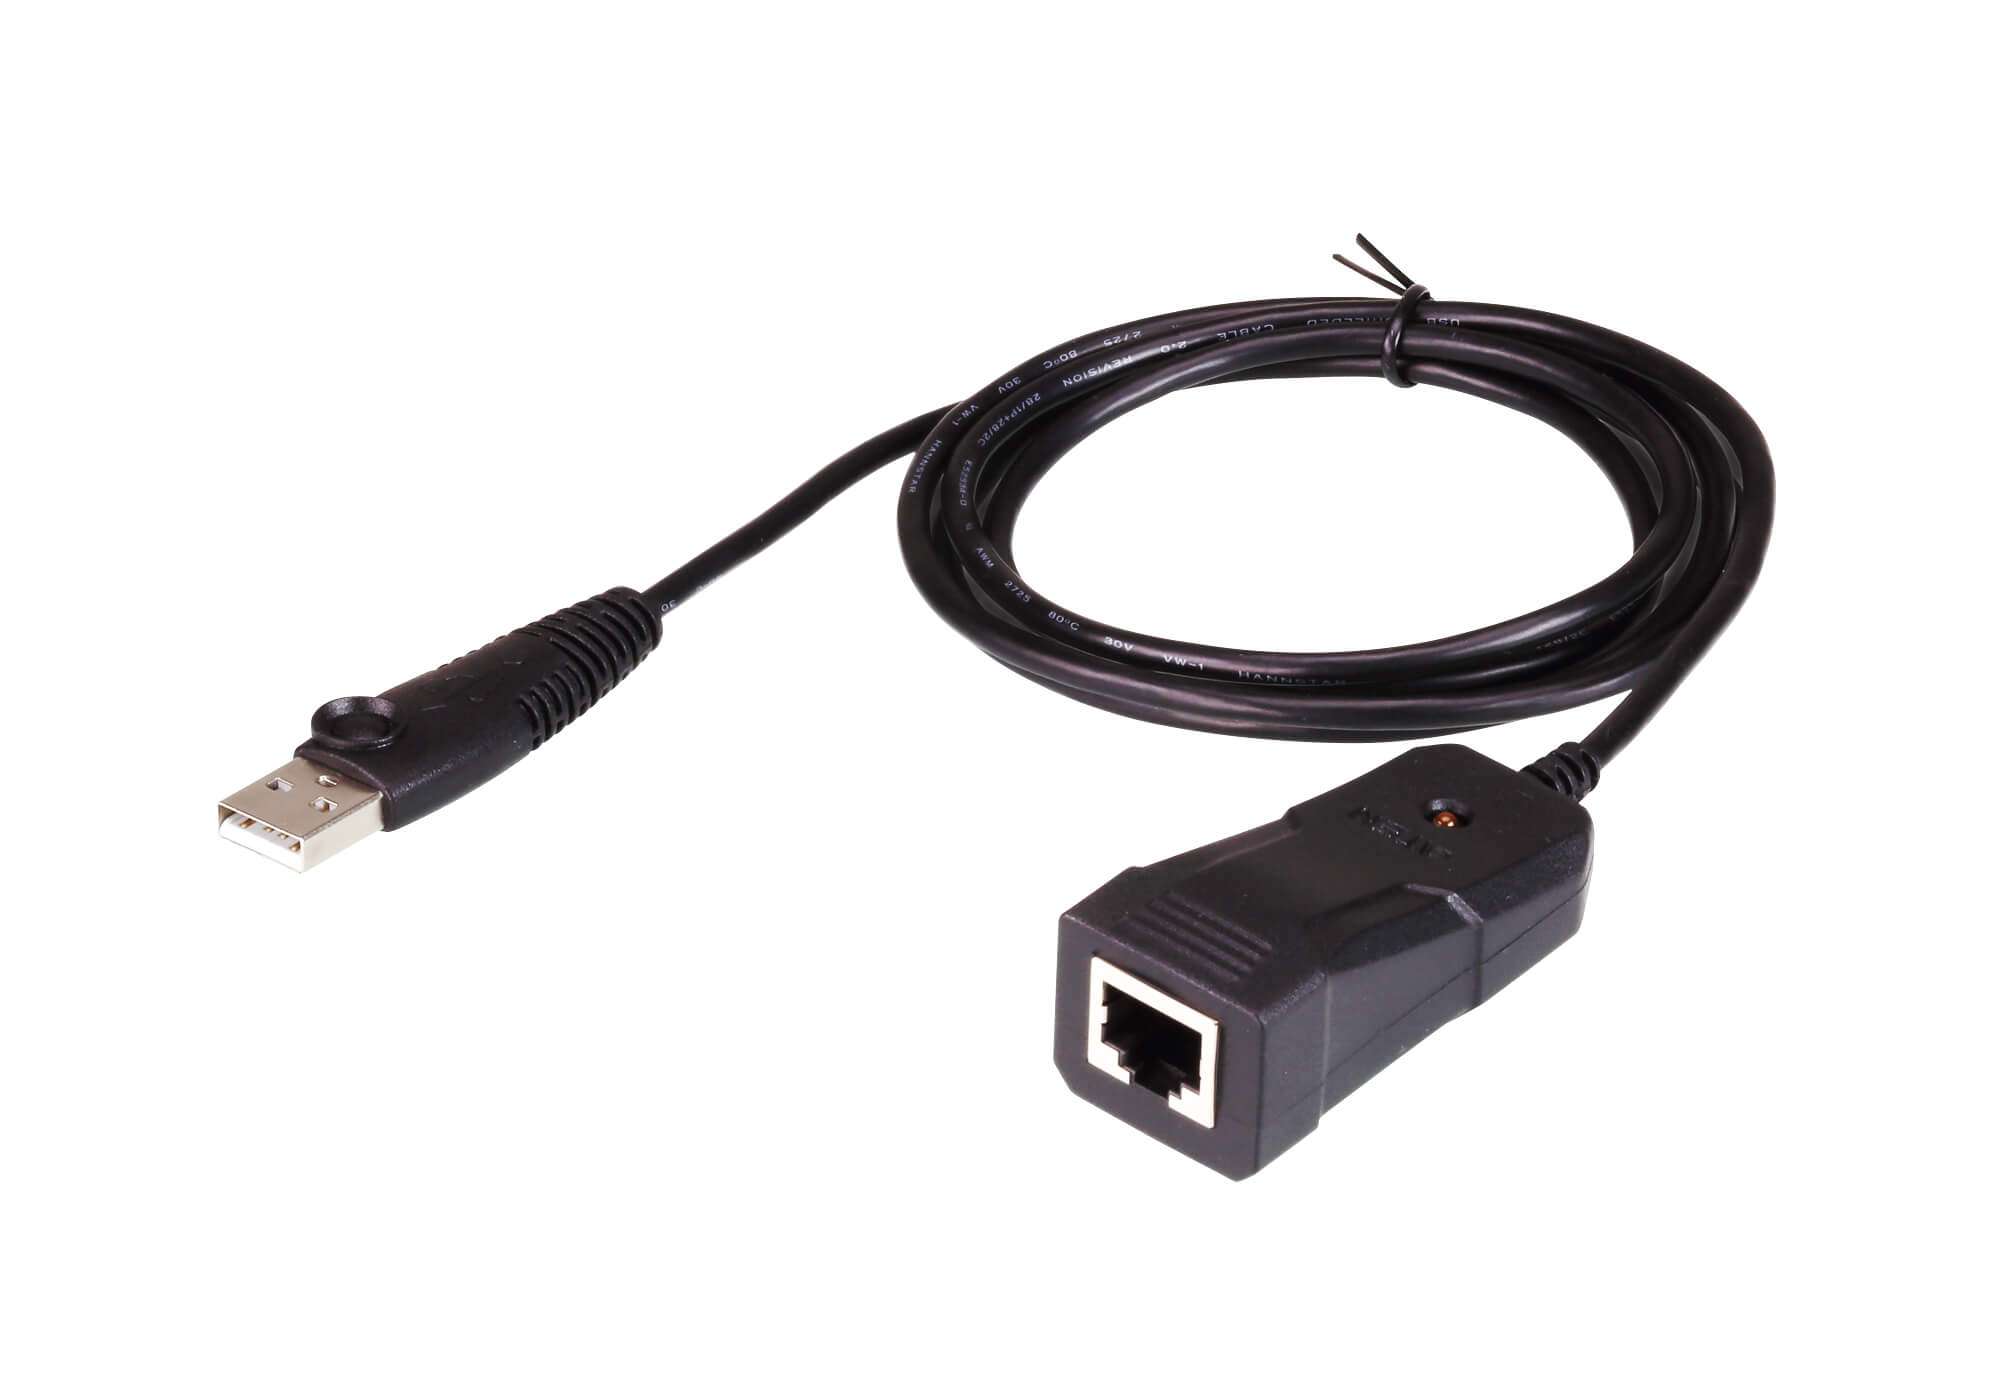 Adapters/Aten: Aten, USB, to, RJ-45, Serial, (RS232), converter;, Support, Straight, RJ45, Cable, 921.6, Kbps, Data, Transfer, Rate;, OS, Compatibility, 